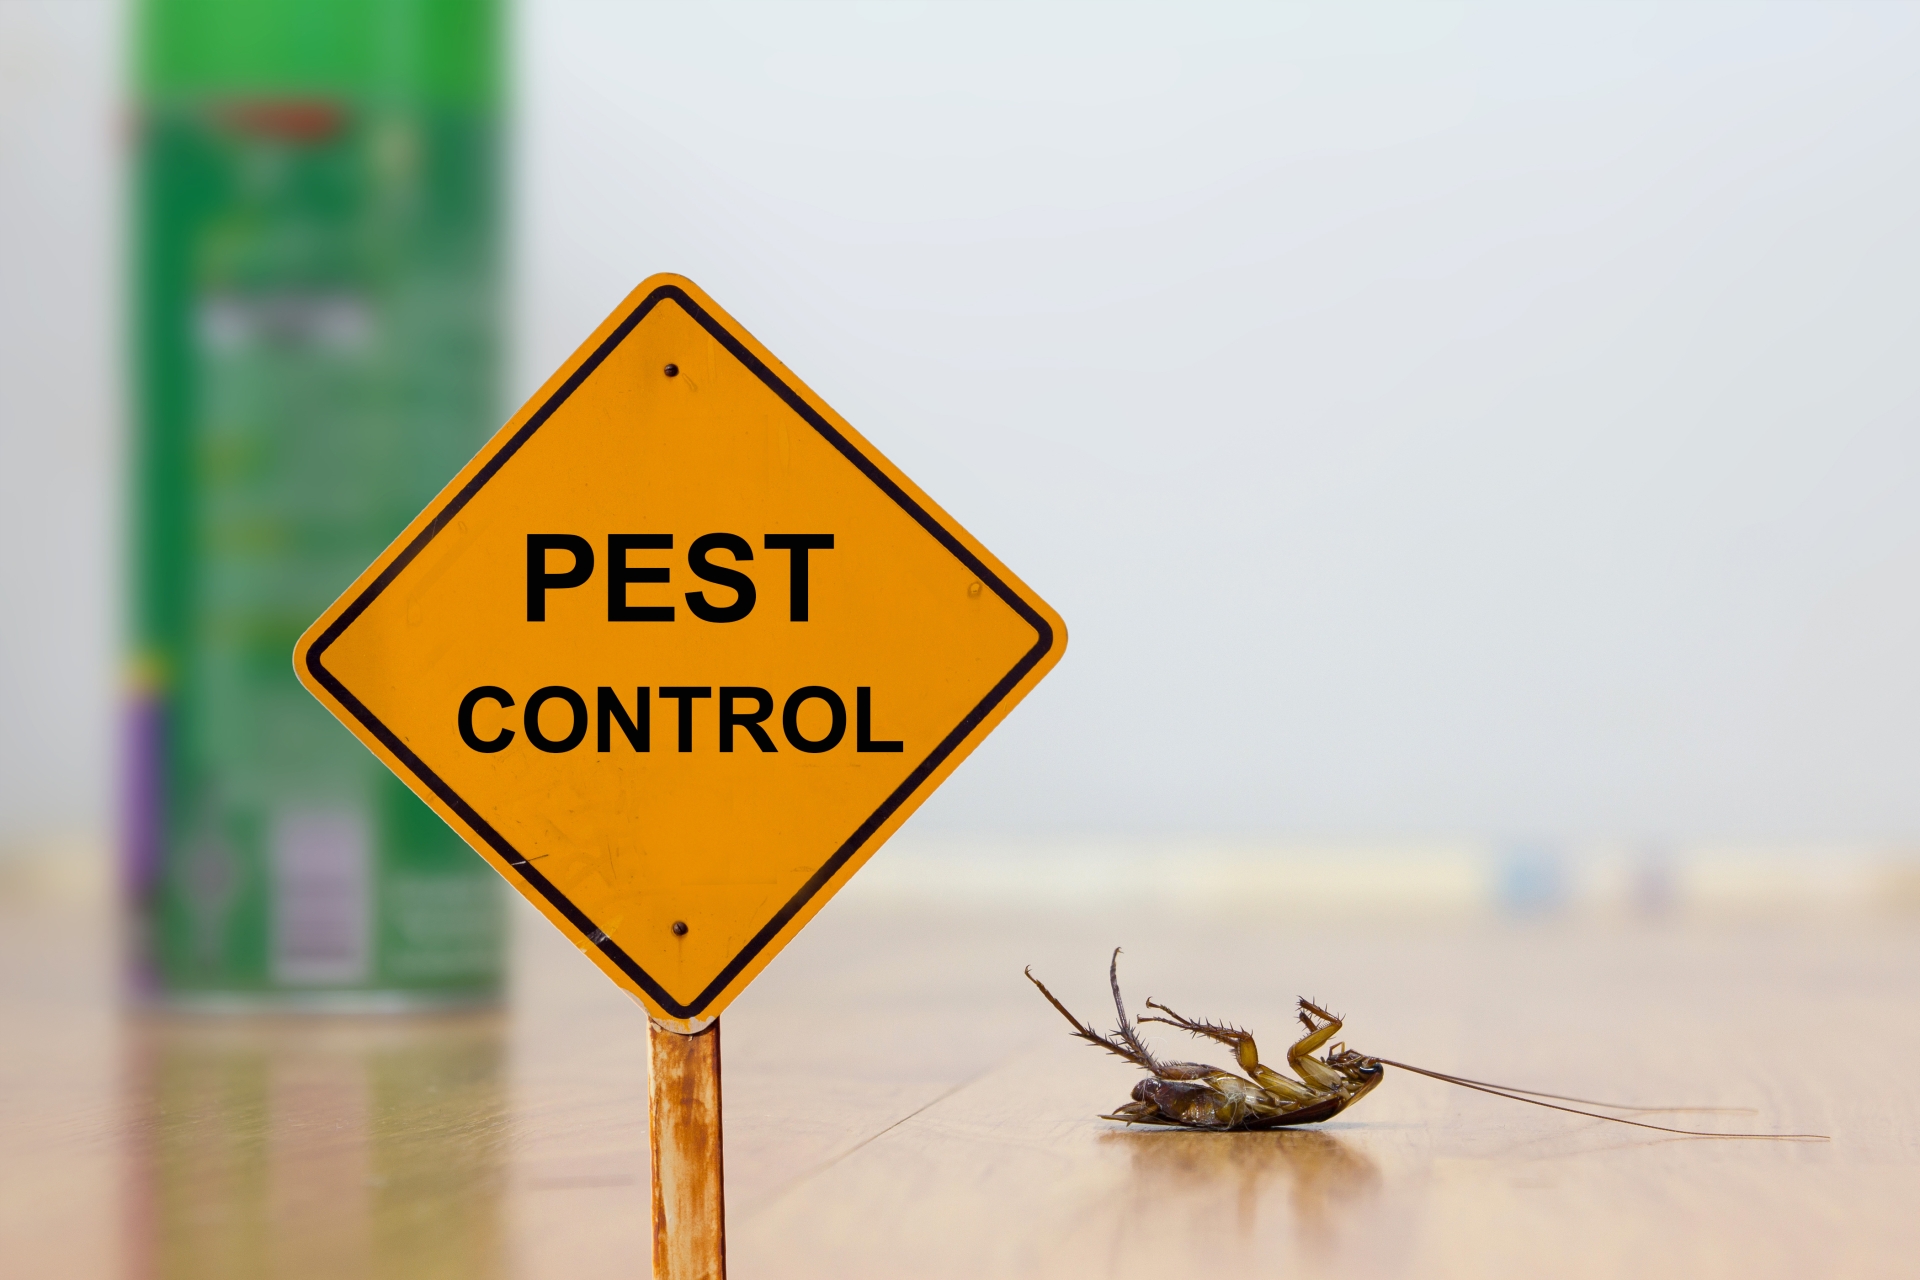 24 Hour Pest Control, Pest Control in Penge, Anerley, SE20. Call Now 020 8166 9746